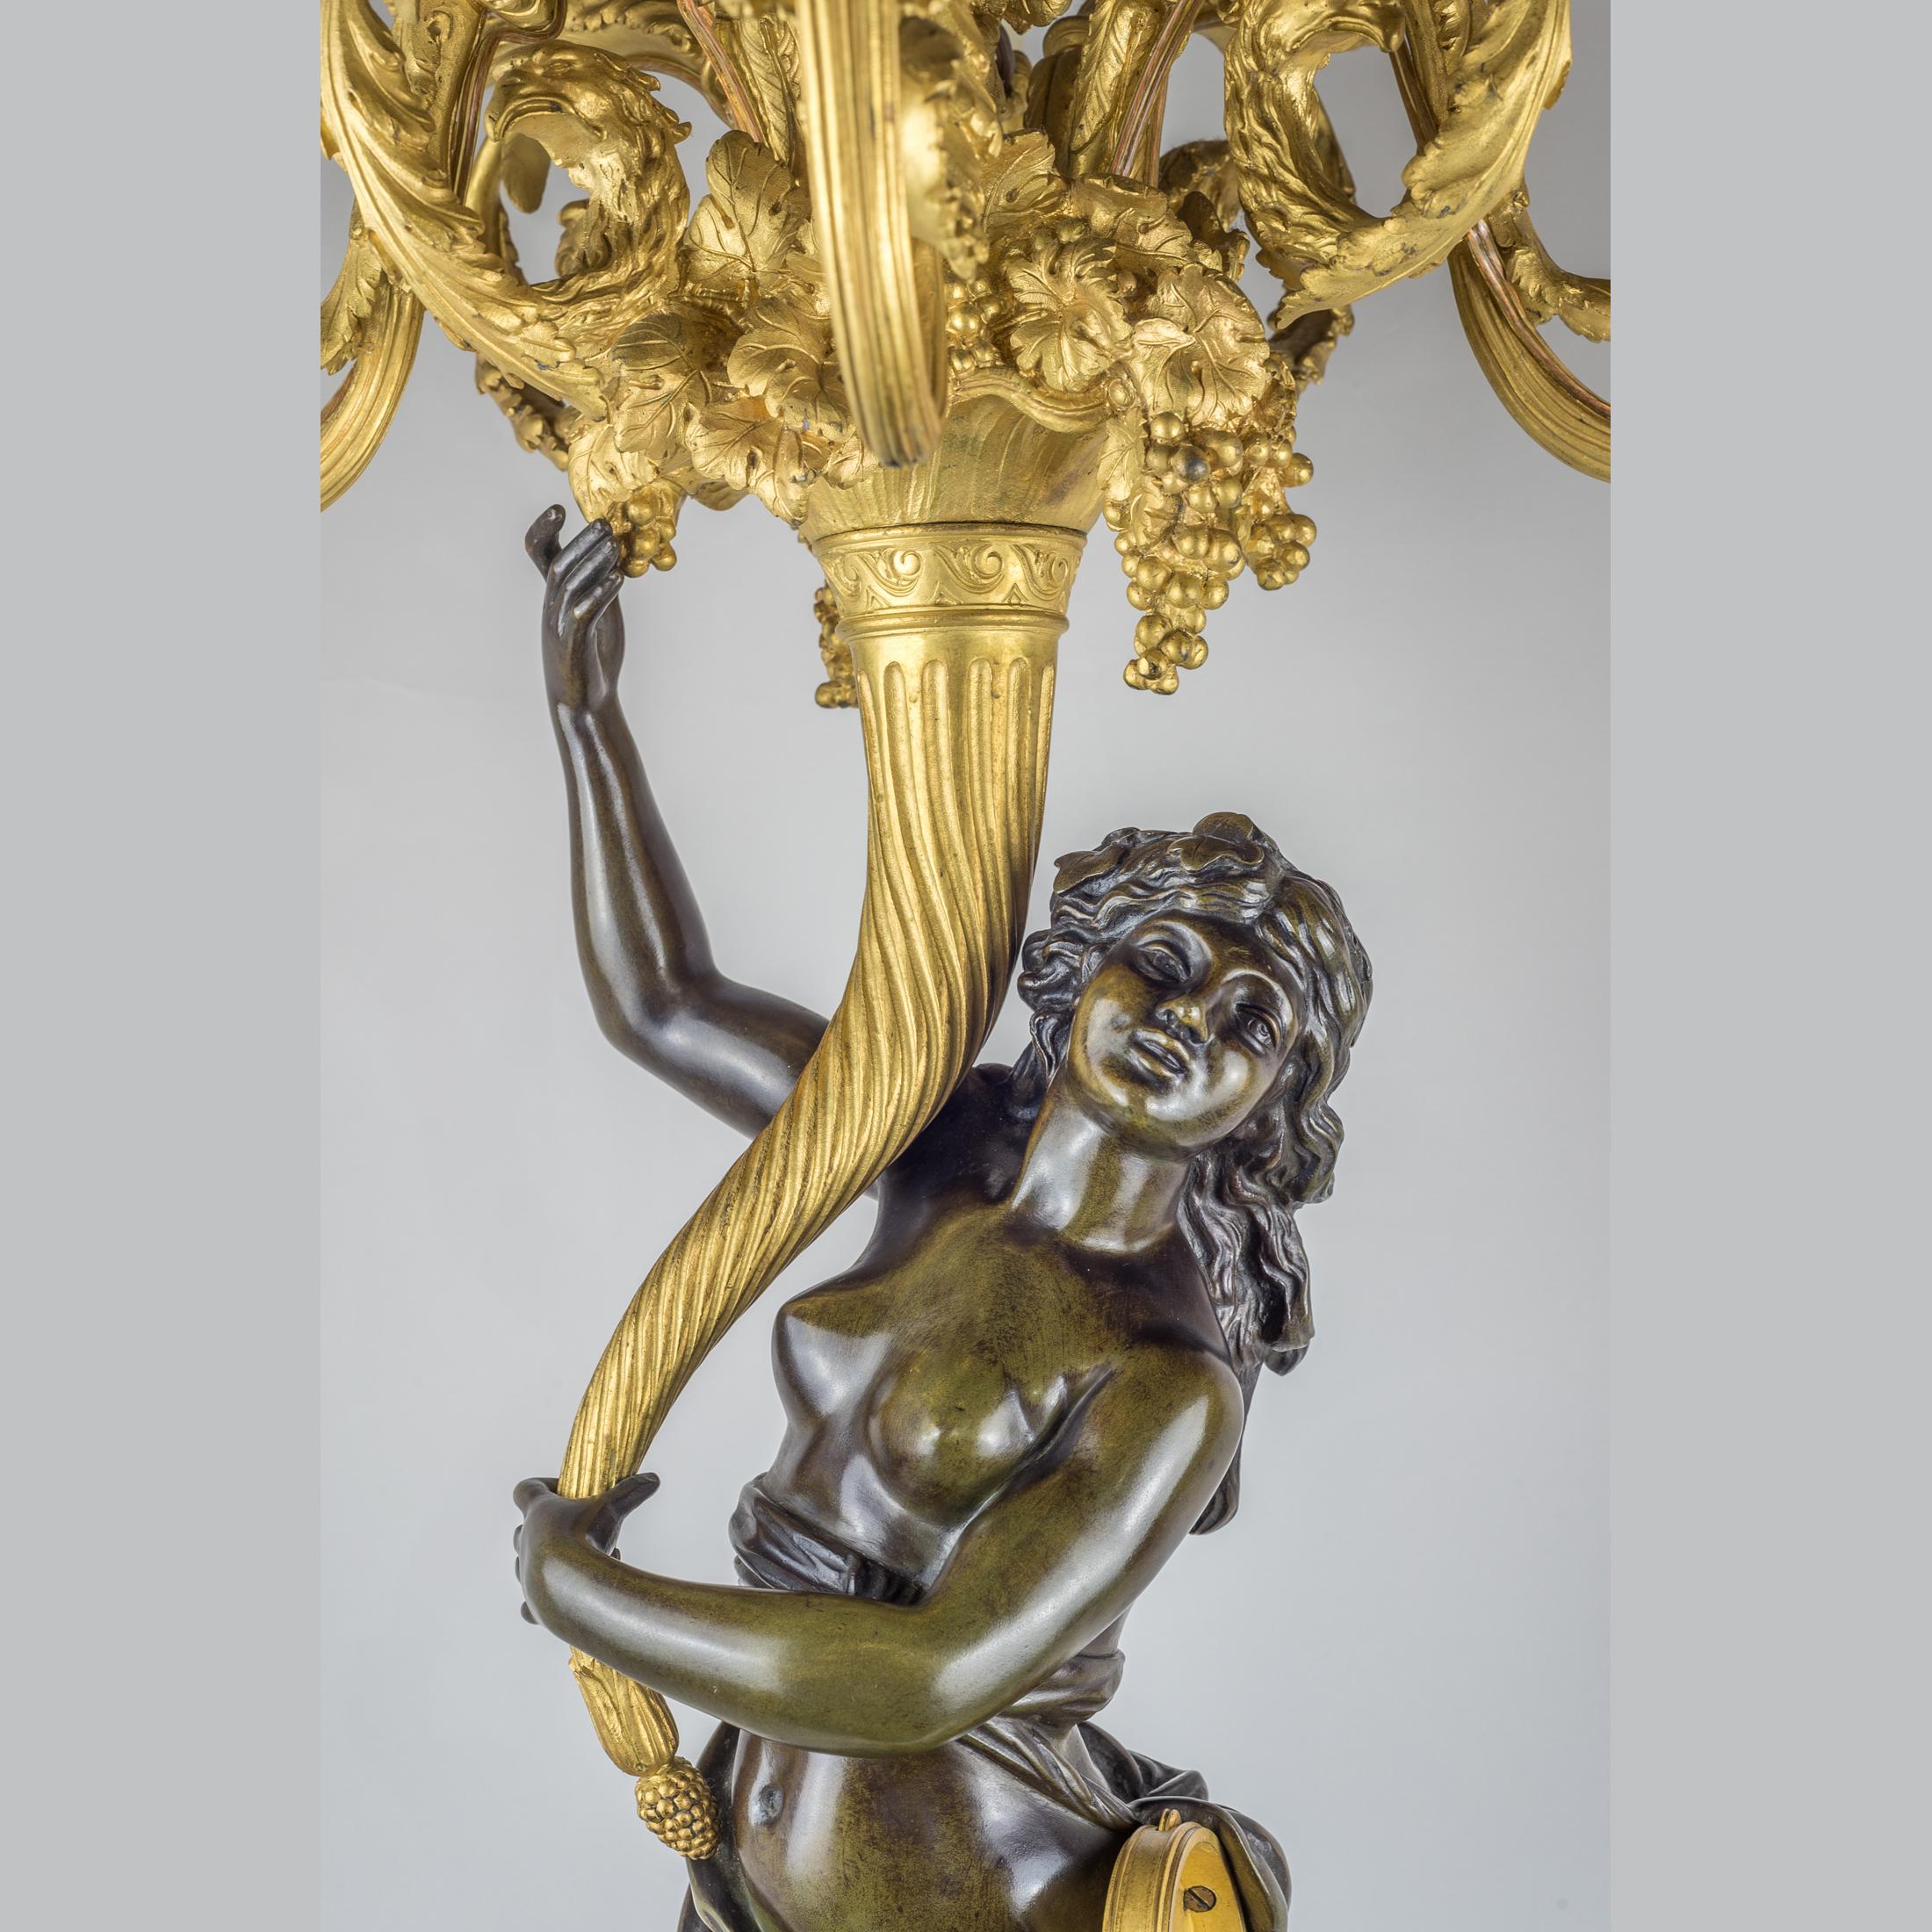 French  Important Pair of Monumental Ormolu and Patinated Bronze Nine-Light Candelabra For Sale